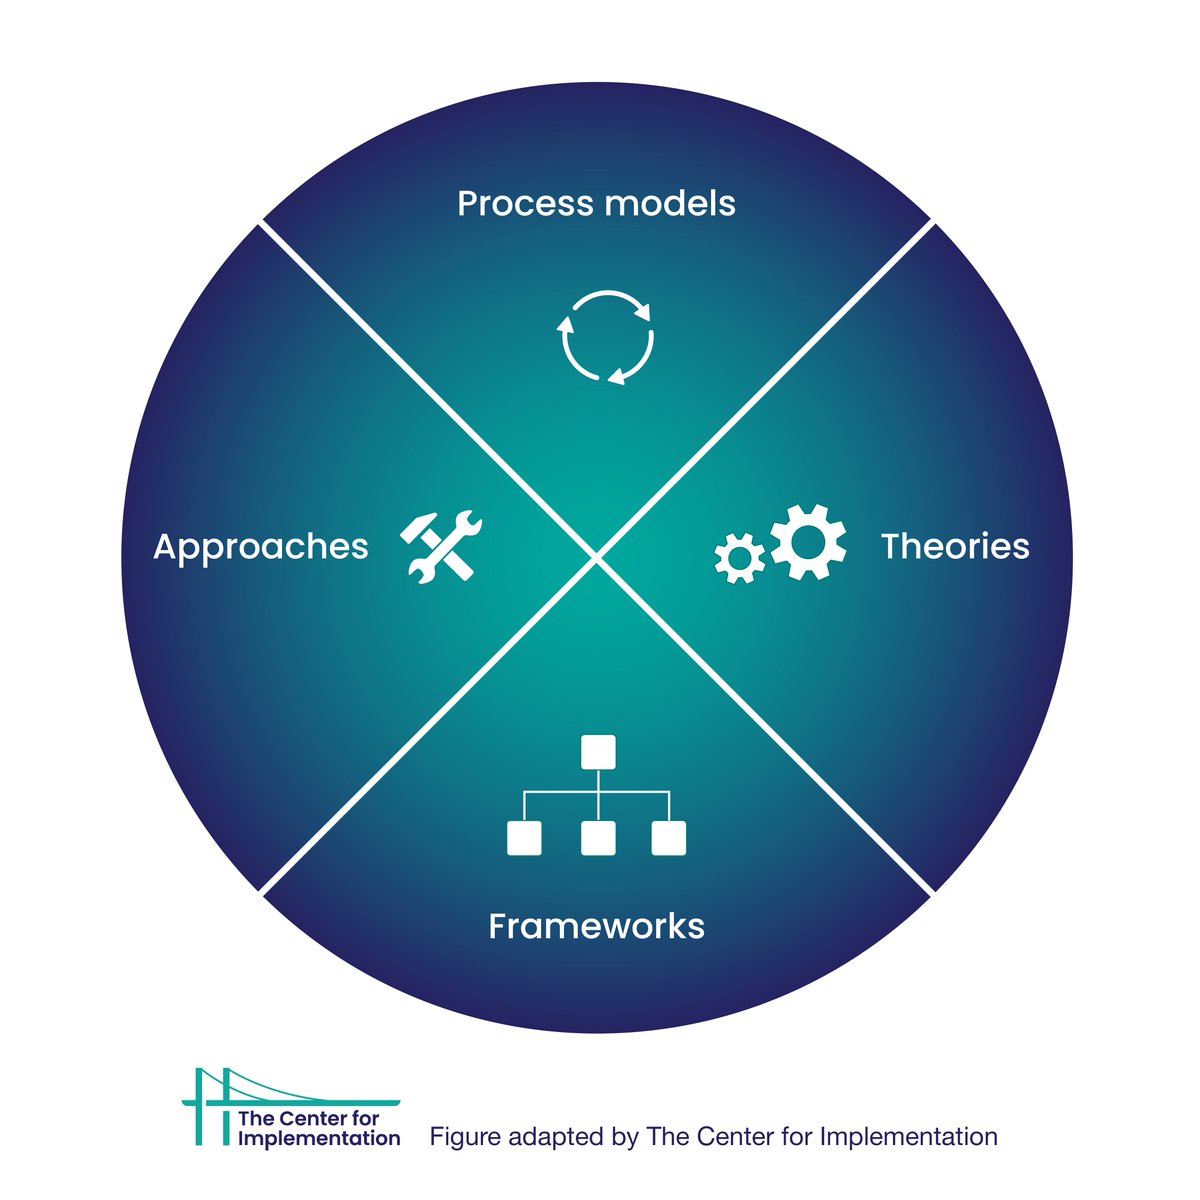 What is the foundational of applying #ImpSci to create change? ▶️ TMFAs [T]heories describe causal mechanisms Process [M]odels specify the stages of imp. [F]rameworks list factors in imp. [A]pproaches describe other methods in imp.